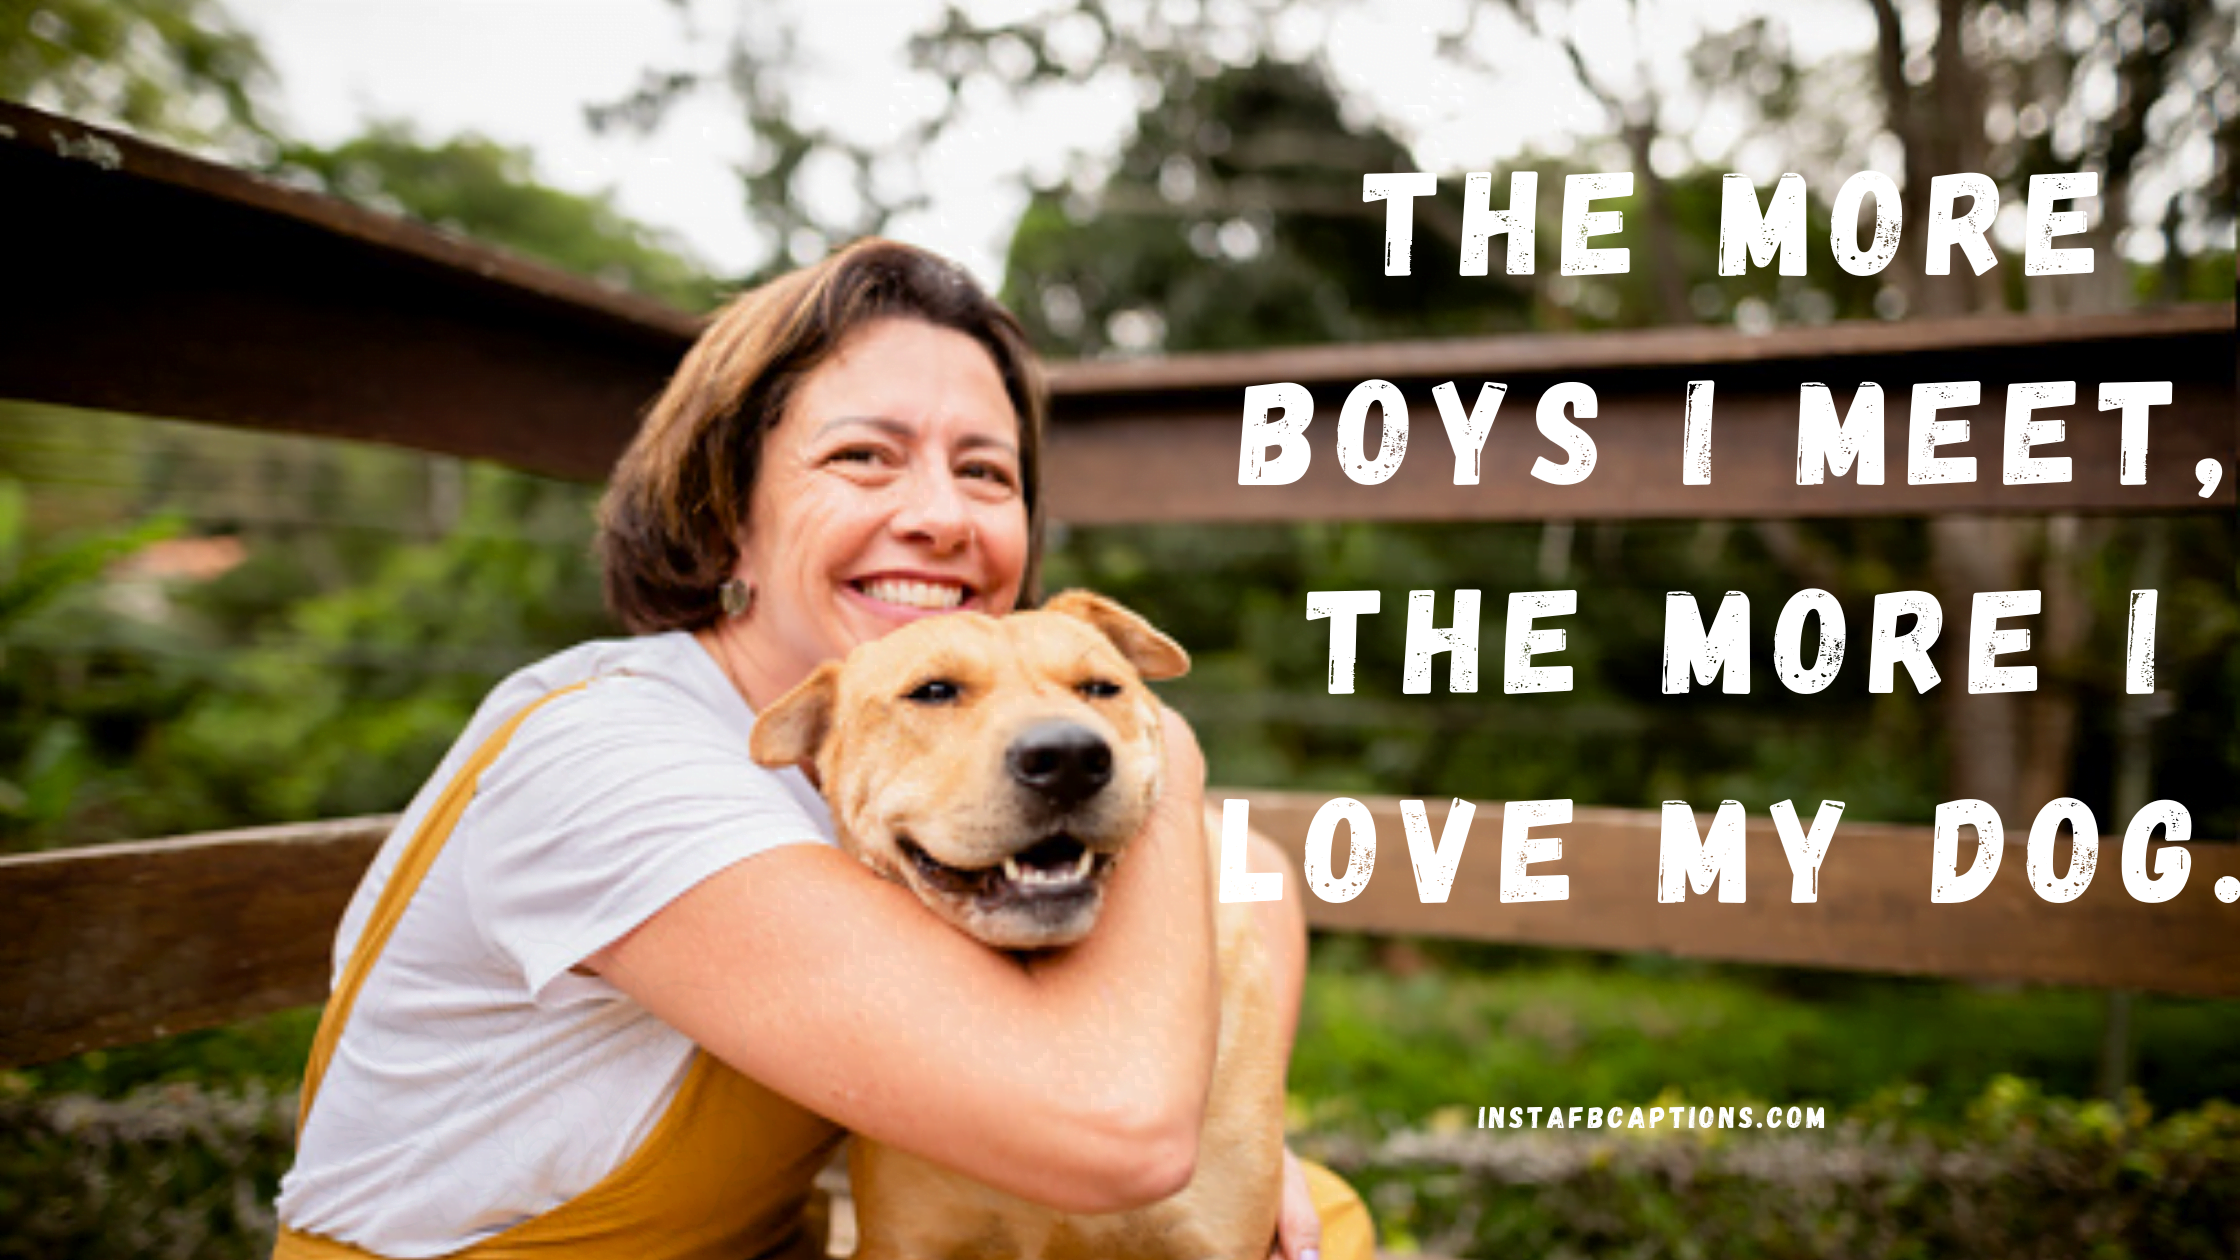 A lady and a dog in the picture with a text written - "The more boys I meet, the more I love my dog"  - Funny Breakup Captions which make you Laugh - 100+ Latest Instagram Captions &#038; Bio On Post Breakup Motivation [2023]